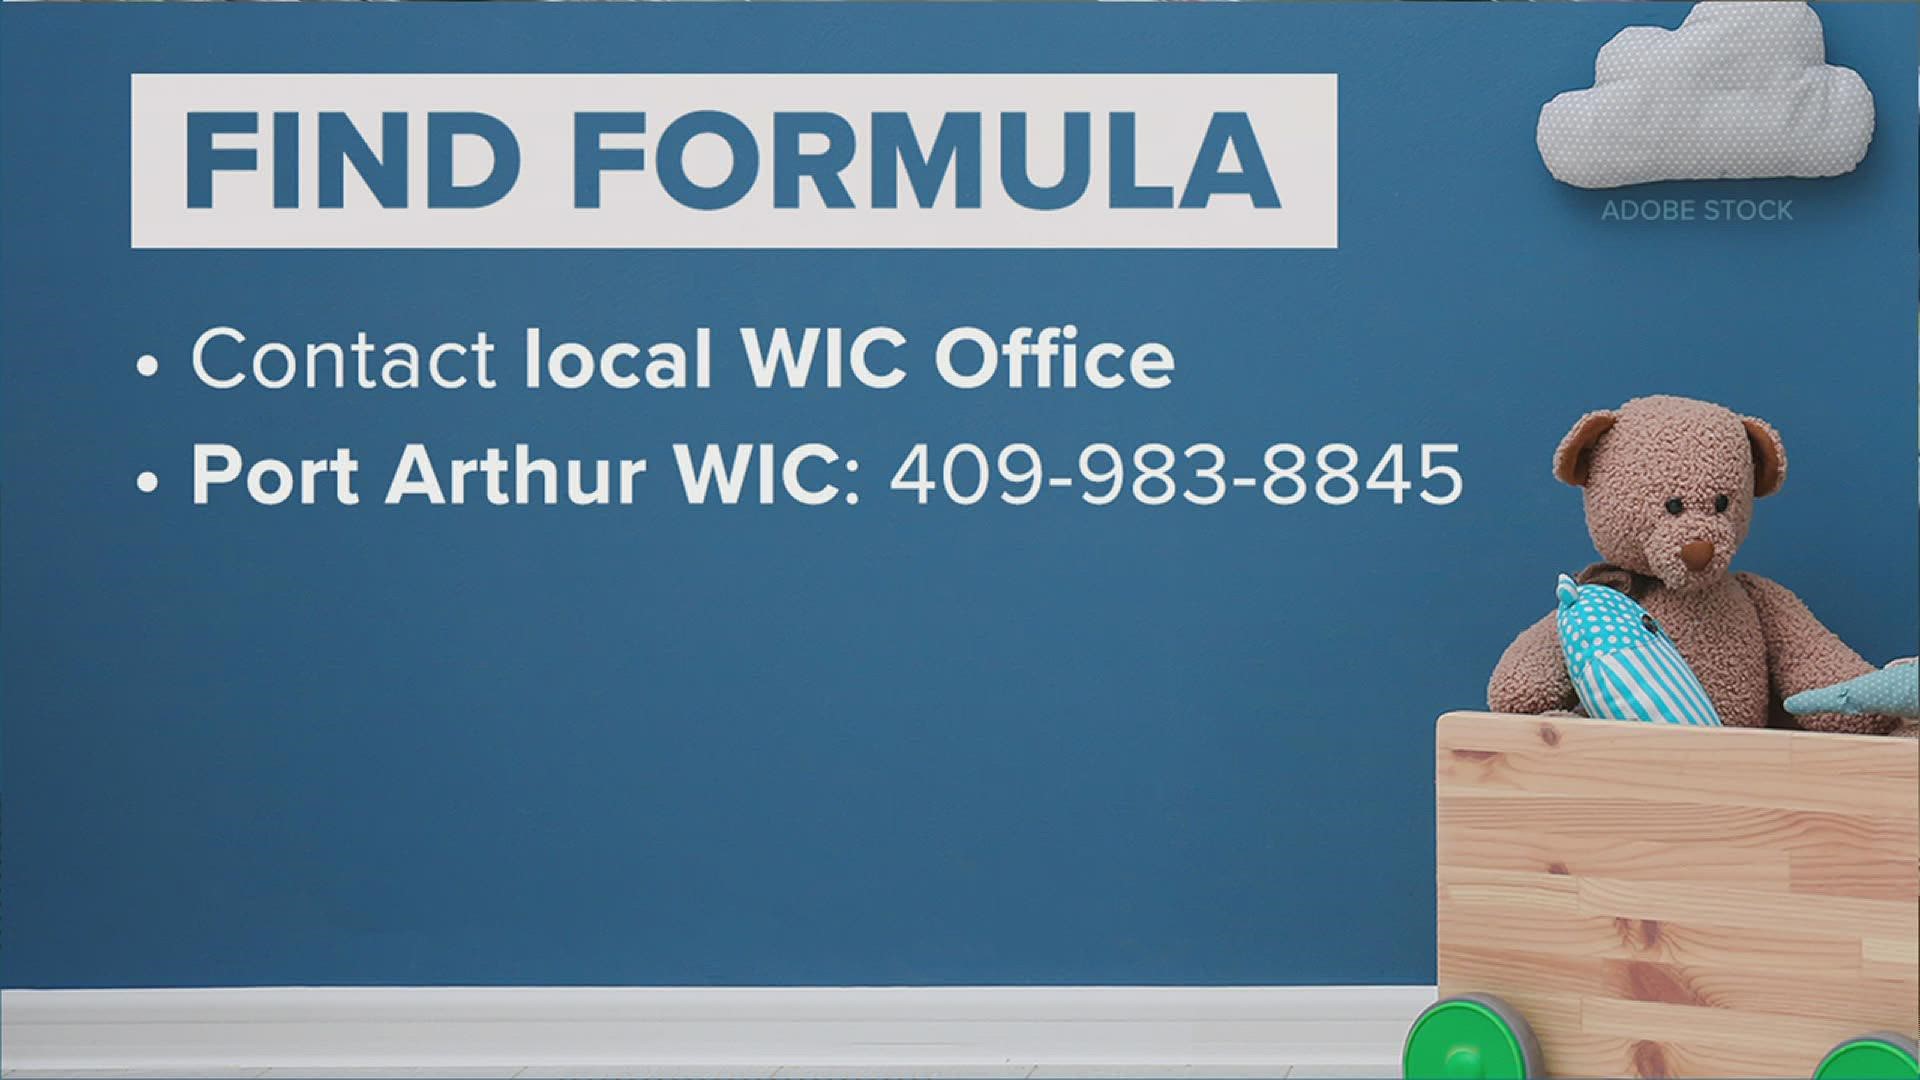 If you need help, you can contact your local WIC office.